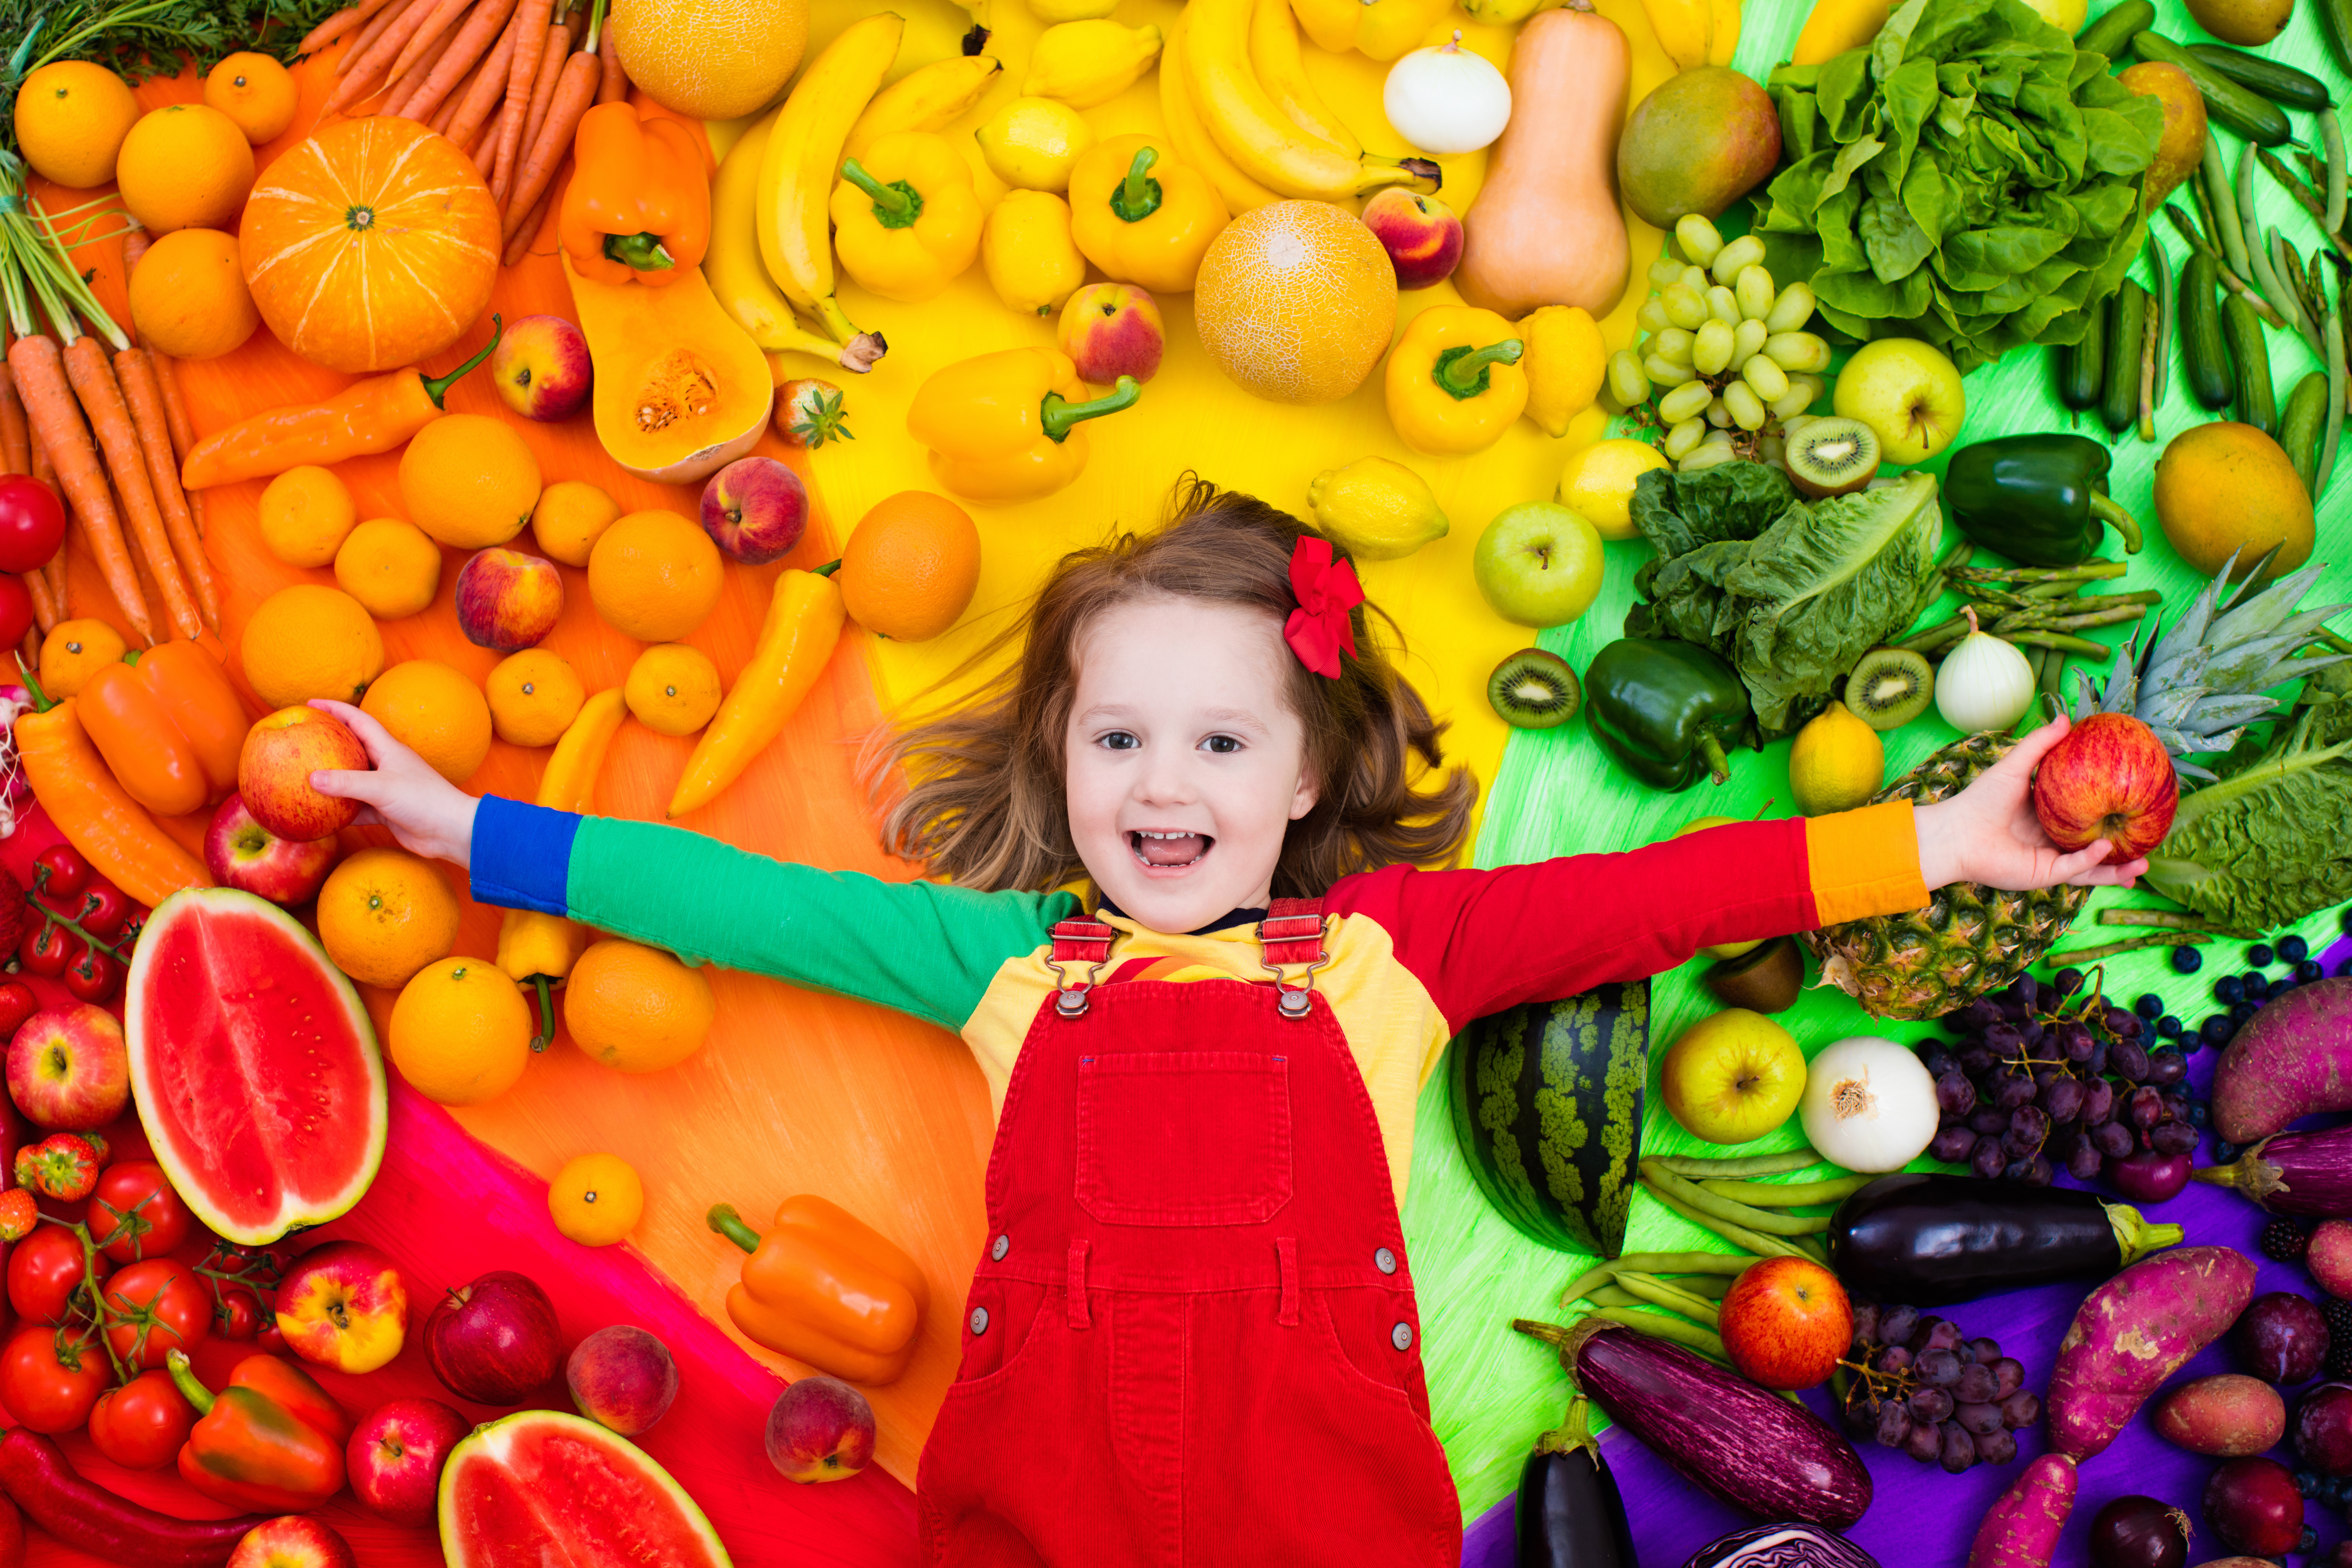 Australia's leading horticultural-industry body has launched an initiative to teach kids the connection between fresh, healthy foods and better moods.